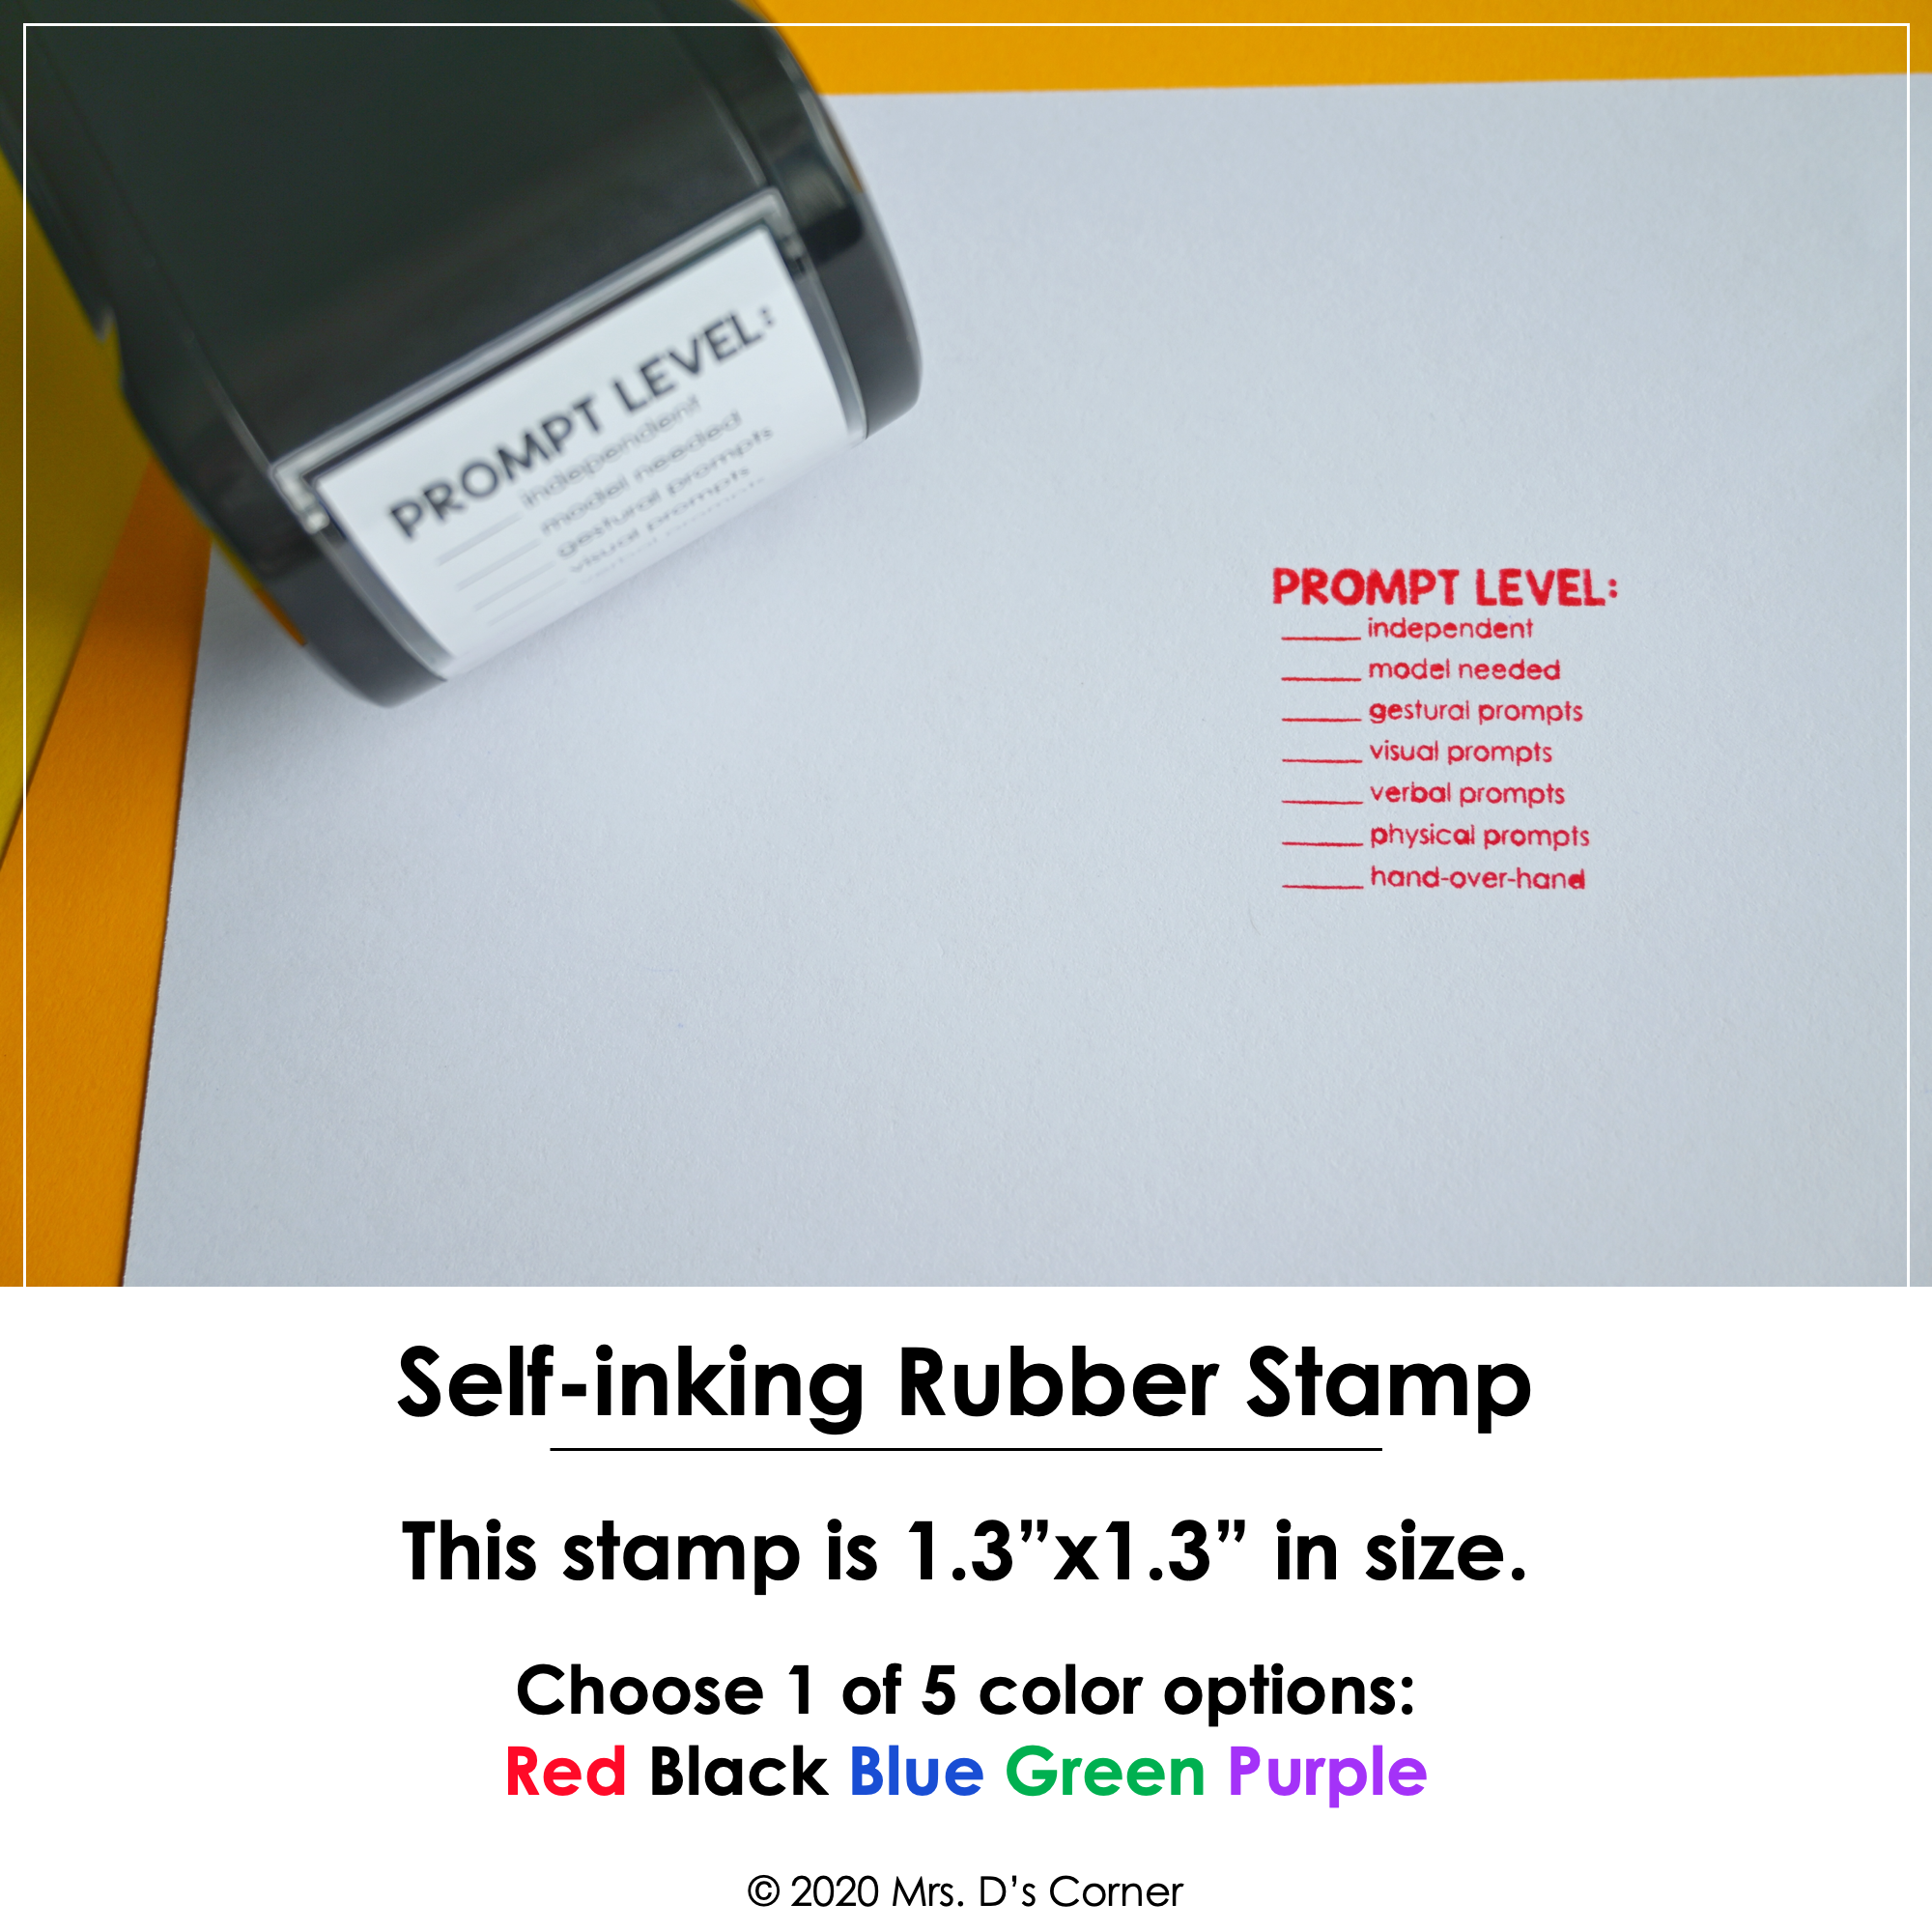 Data Collected Self-inking Rubber Stamp  Mrs. D's Rubber Stamp Collec –  mrsdsshop